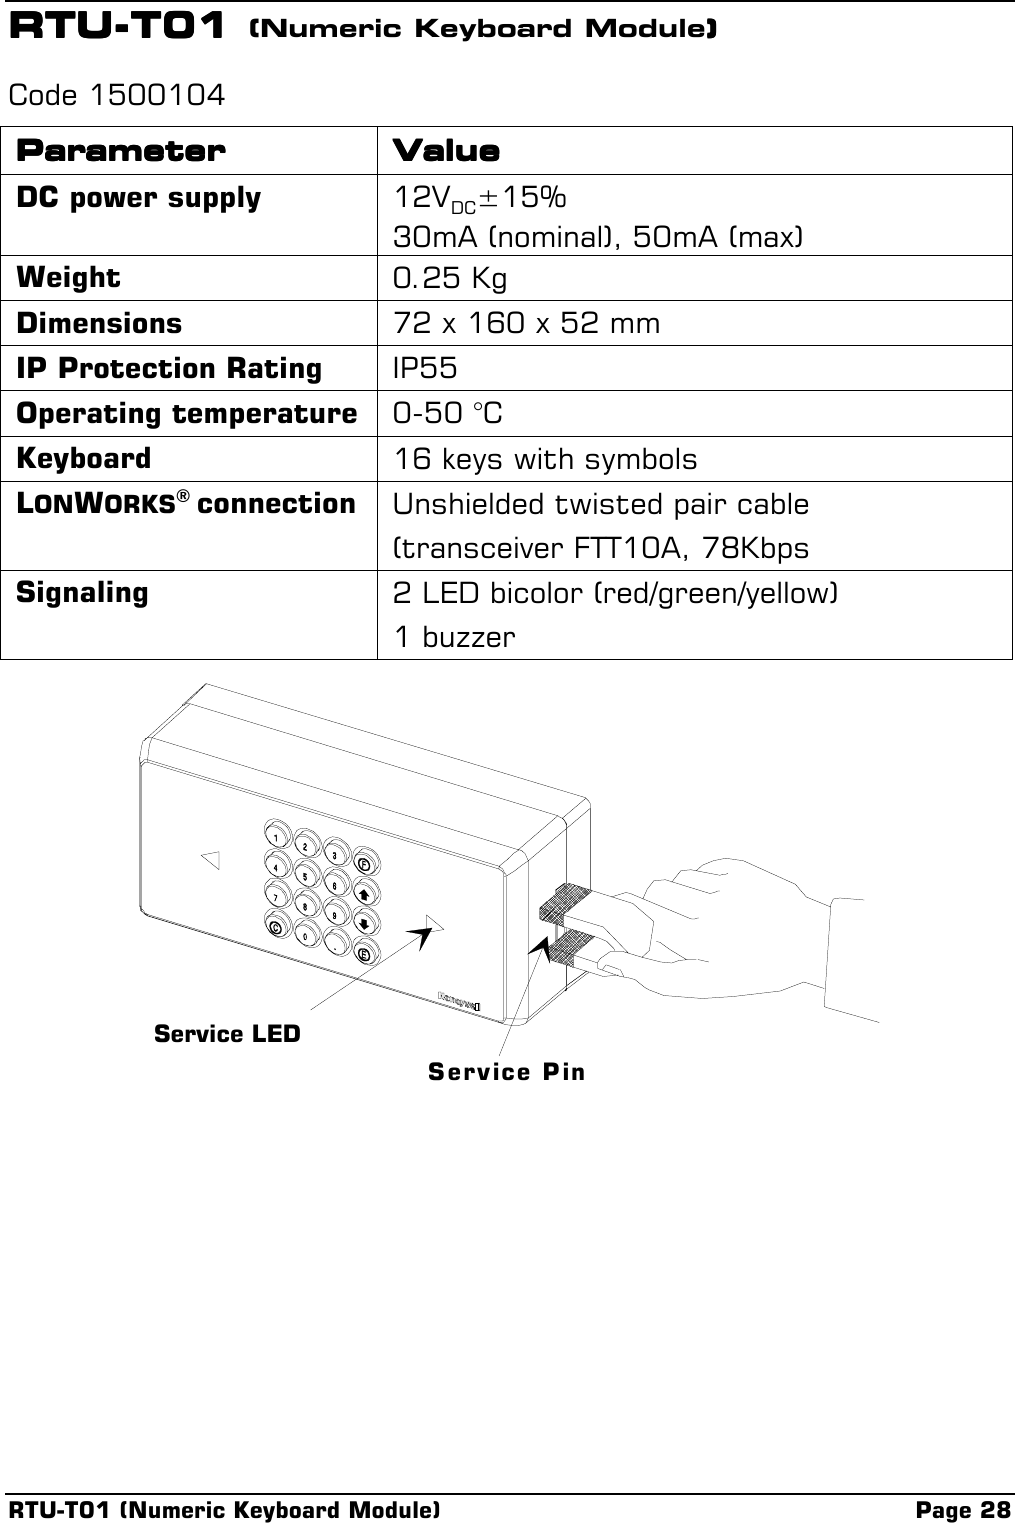 RTU-T01 (Numeric Keyboard Module) Page 28RTU-T01 RTU-T01 RTU-T01 RTU-T01 (Numeric Keyboard Module))))Code 1500104ParameterParameterParameterParameter ValueValueValueValueDC power supply 12VDC±15%30mA (nominal), 50mA (max)Weight 0.25 KgDimensions 72 x 160 x 52 mmIP Protection Rating IP55Operating temperature 0-50 °CKeyboard 16 keys with symbolsLONWORKS® connection Unshielded twisted pair cable(transceiver FTT10A, 78KbpsSignaling 2 LED bicolor (red/green/yellow)1 buzzerService LEDService Pin